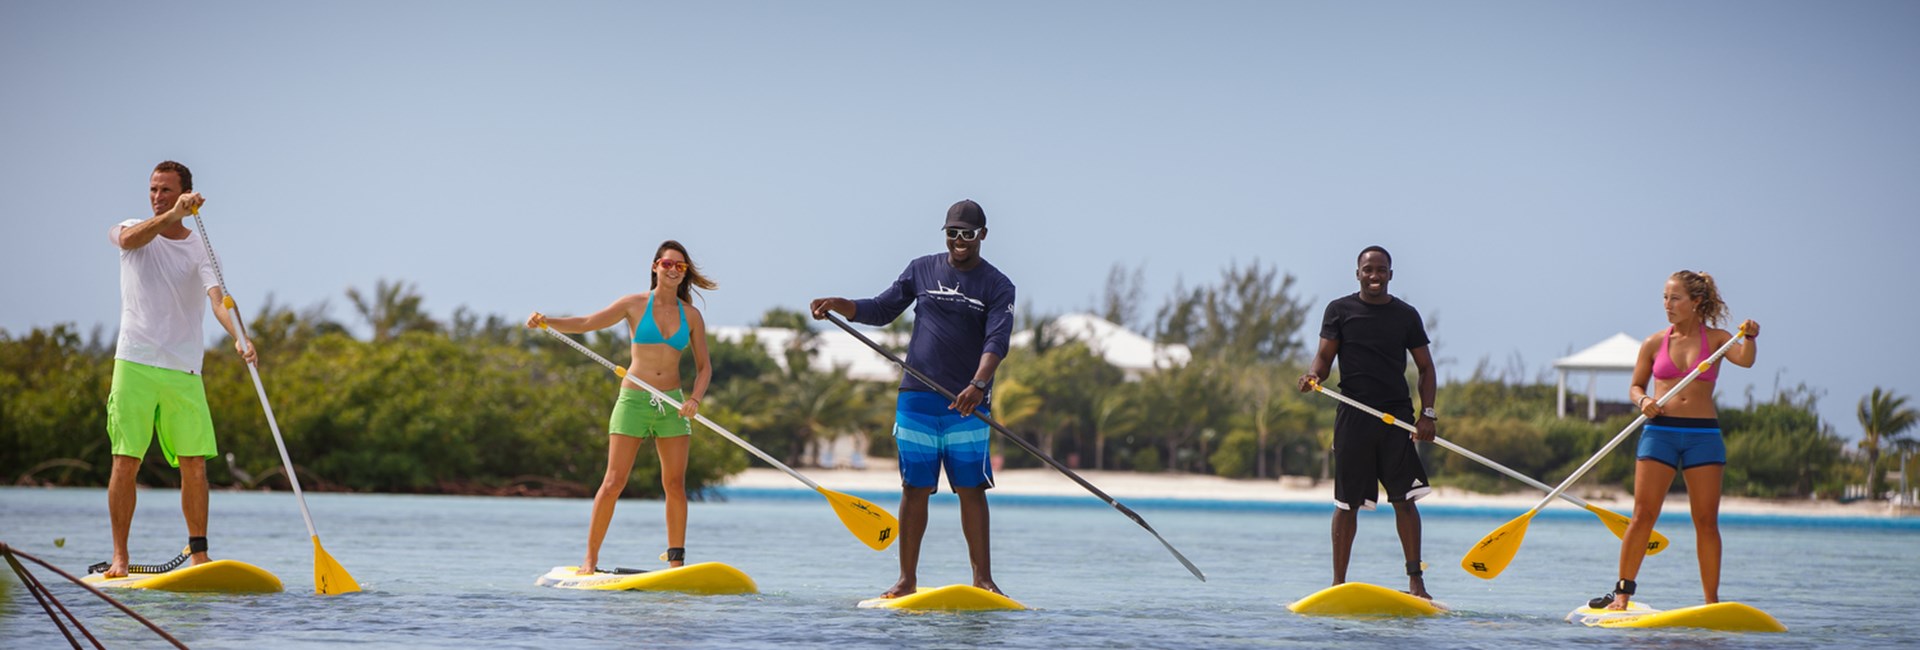 group of friends on stand up paddle boards